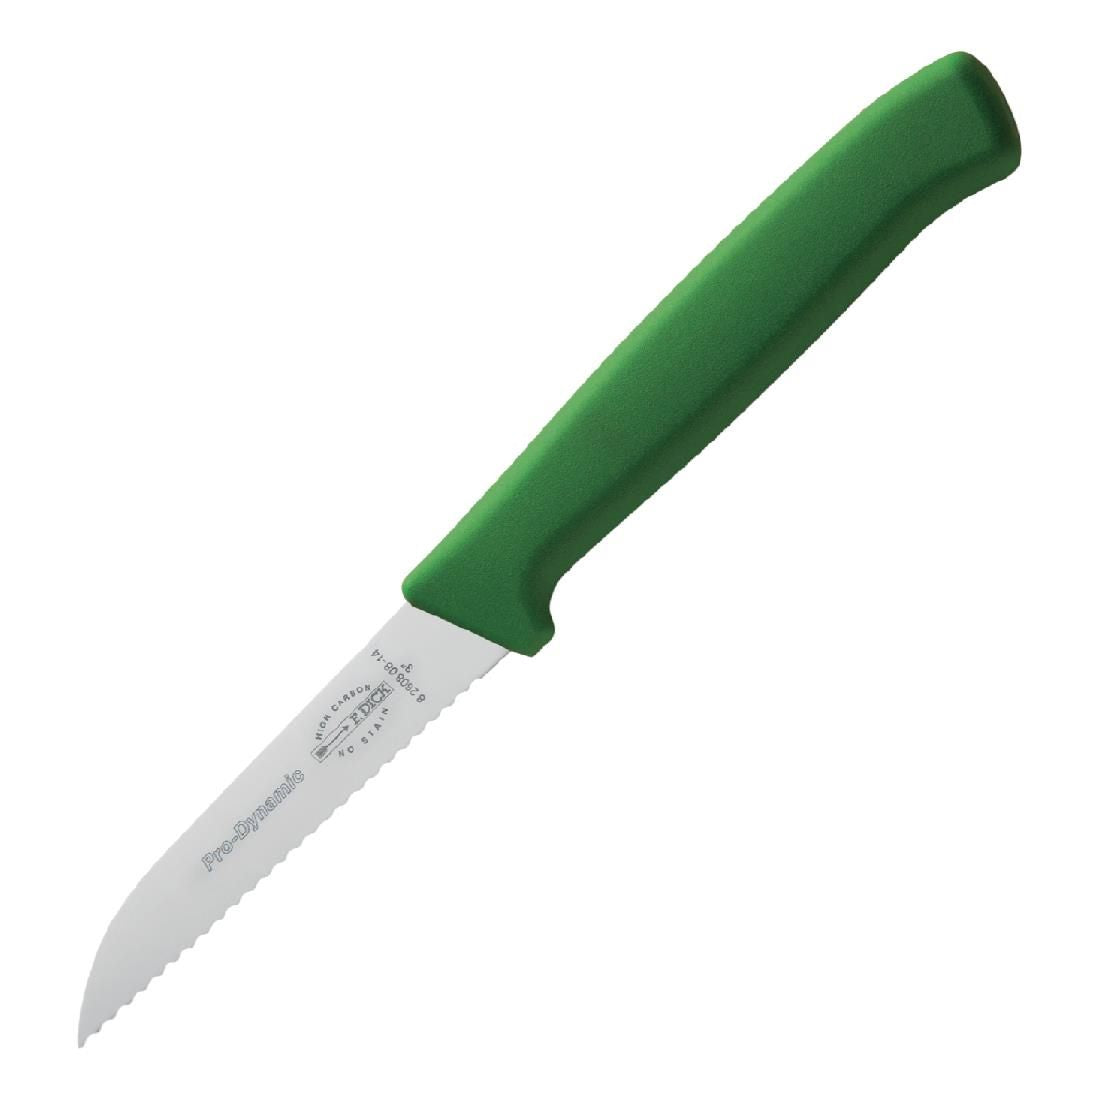 DL364 Dick Pro Dynamic HACCP Serrated Utility Knife Green 7.5cm JD Catering Equipment Solutions Ltd